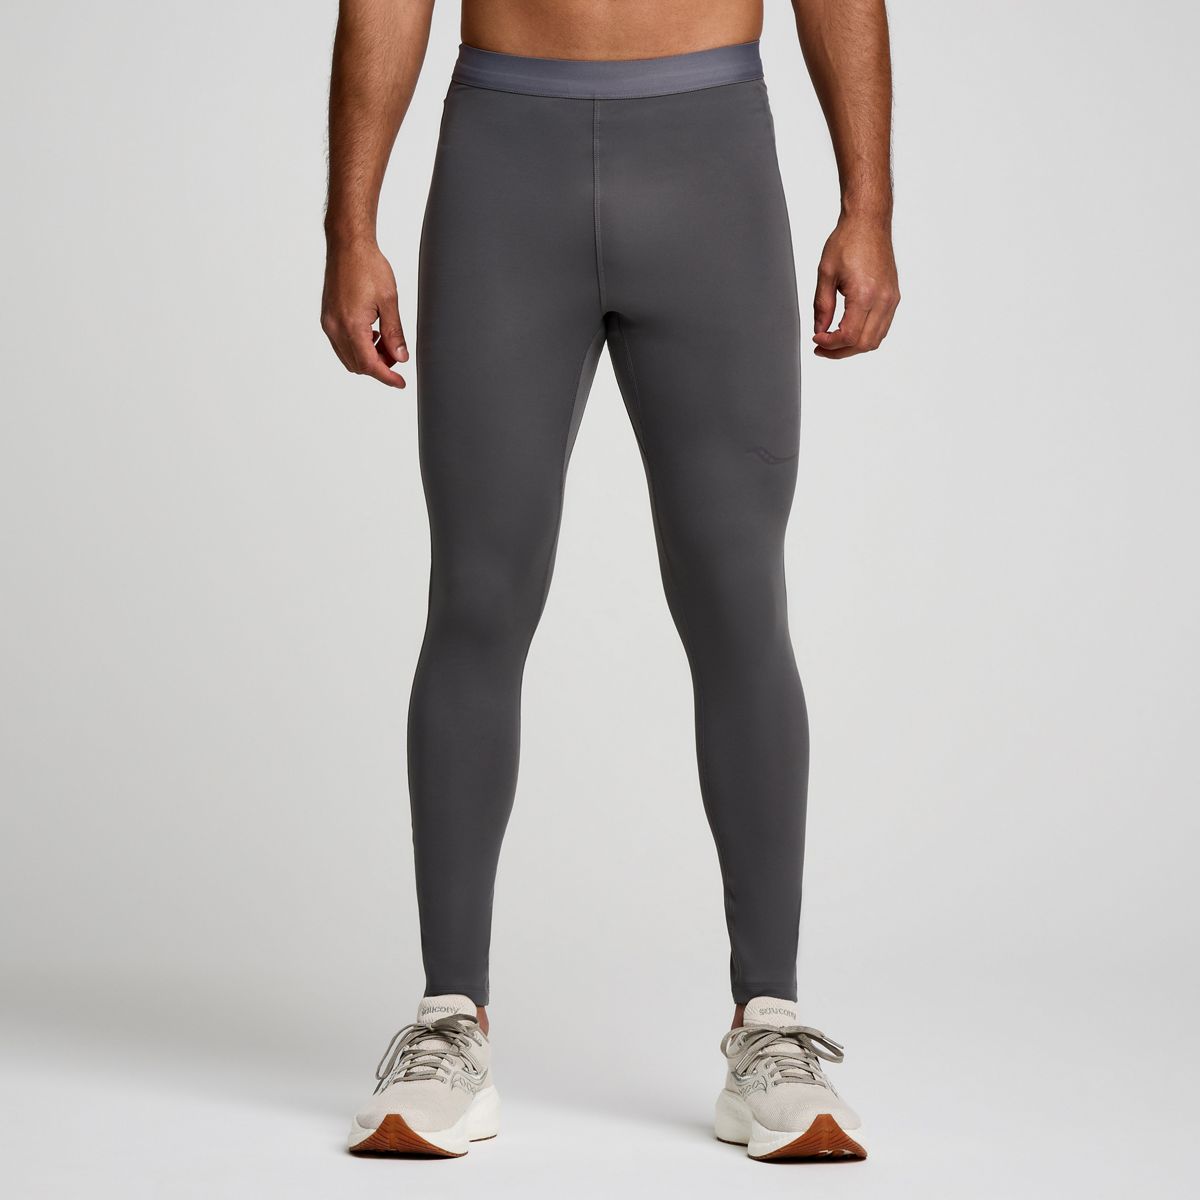 Running Shorts Men's Compression Sport Underwear Tights Sweatpants Fitness  Quick Dry Trunks2425